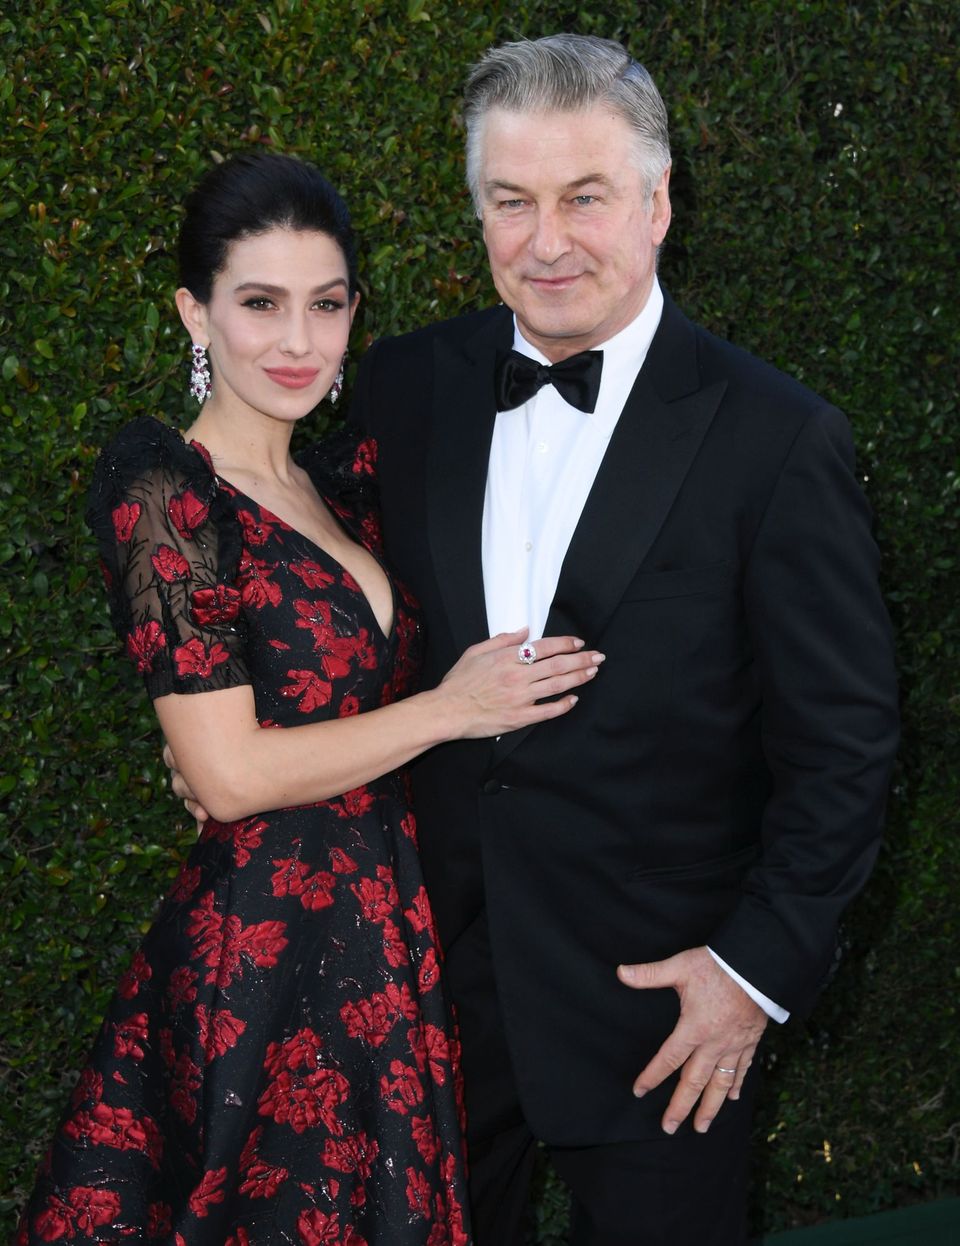 Hilaria Baldwin and Alec Baldwin during the 25th Annual Screen Actors Guild Awards at The Shrine Auditorium on January 27, 2019 in Los Angeles, California. | Source: Getty Images